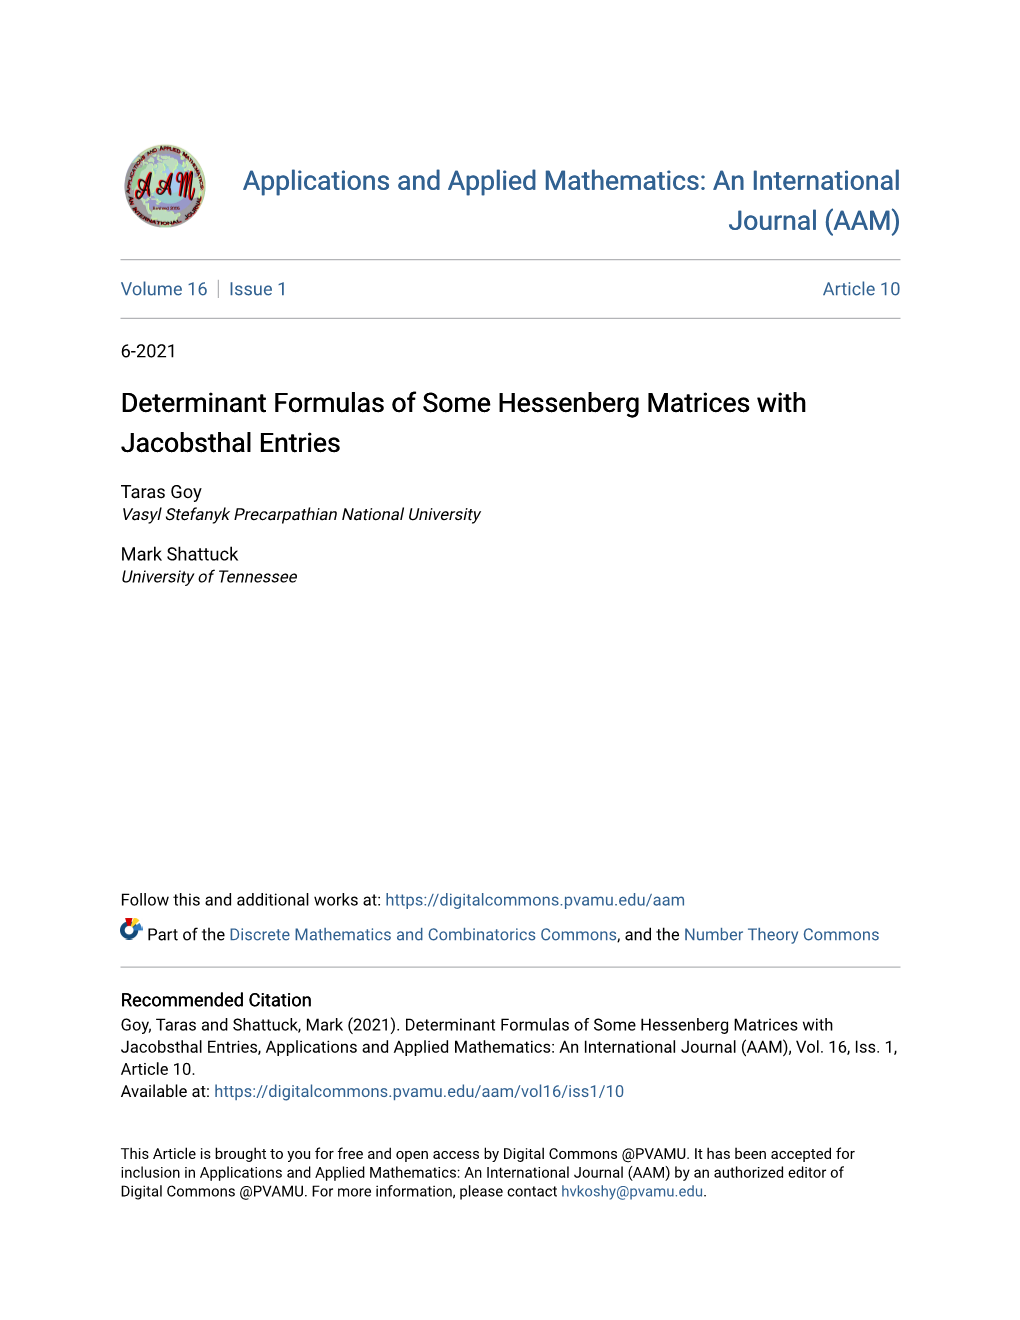 Determinant Formulas of Some Hessenberg Matrices with Jacobsthal Entries